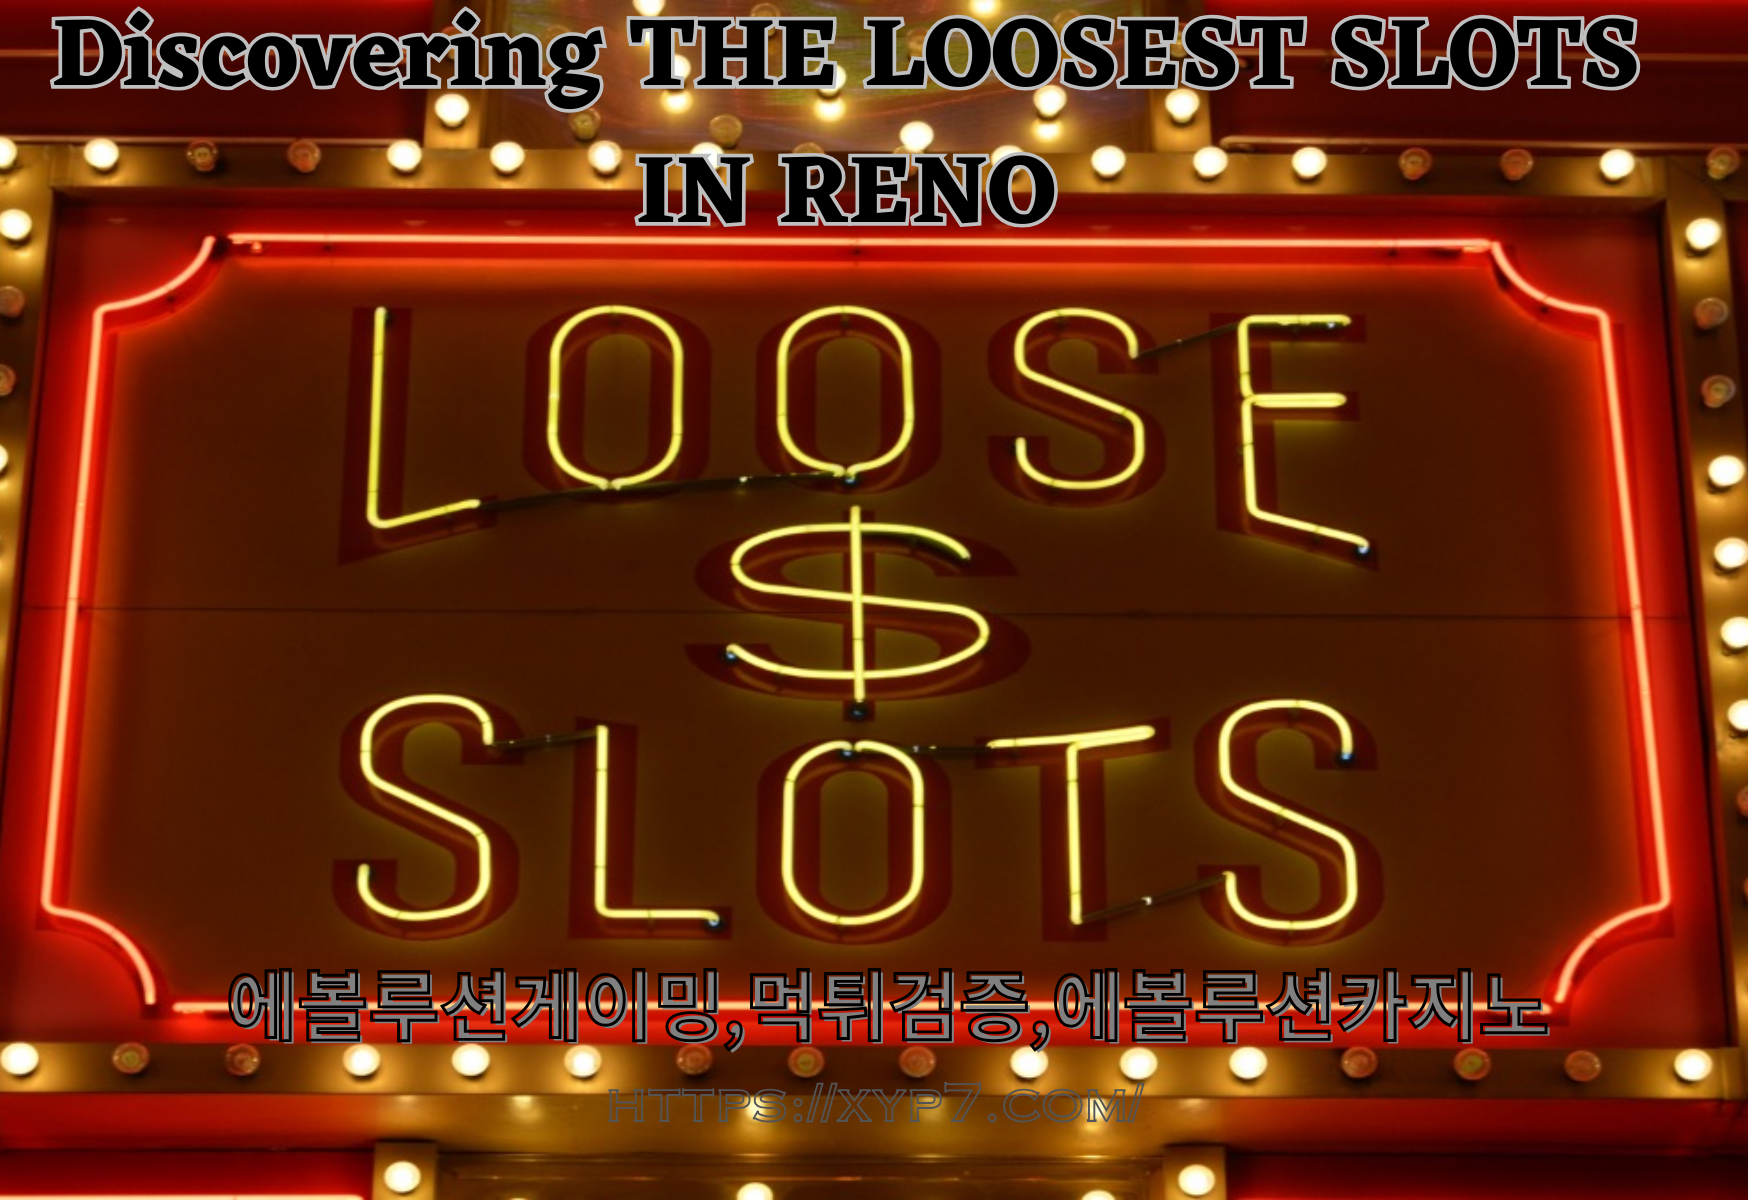 Discovering THE LOOSEST SLOTS IN RENO